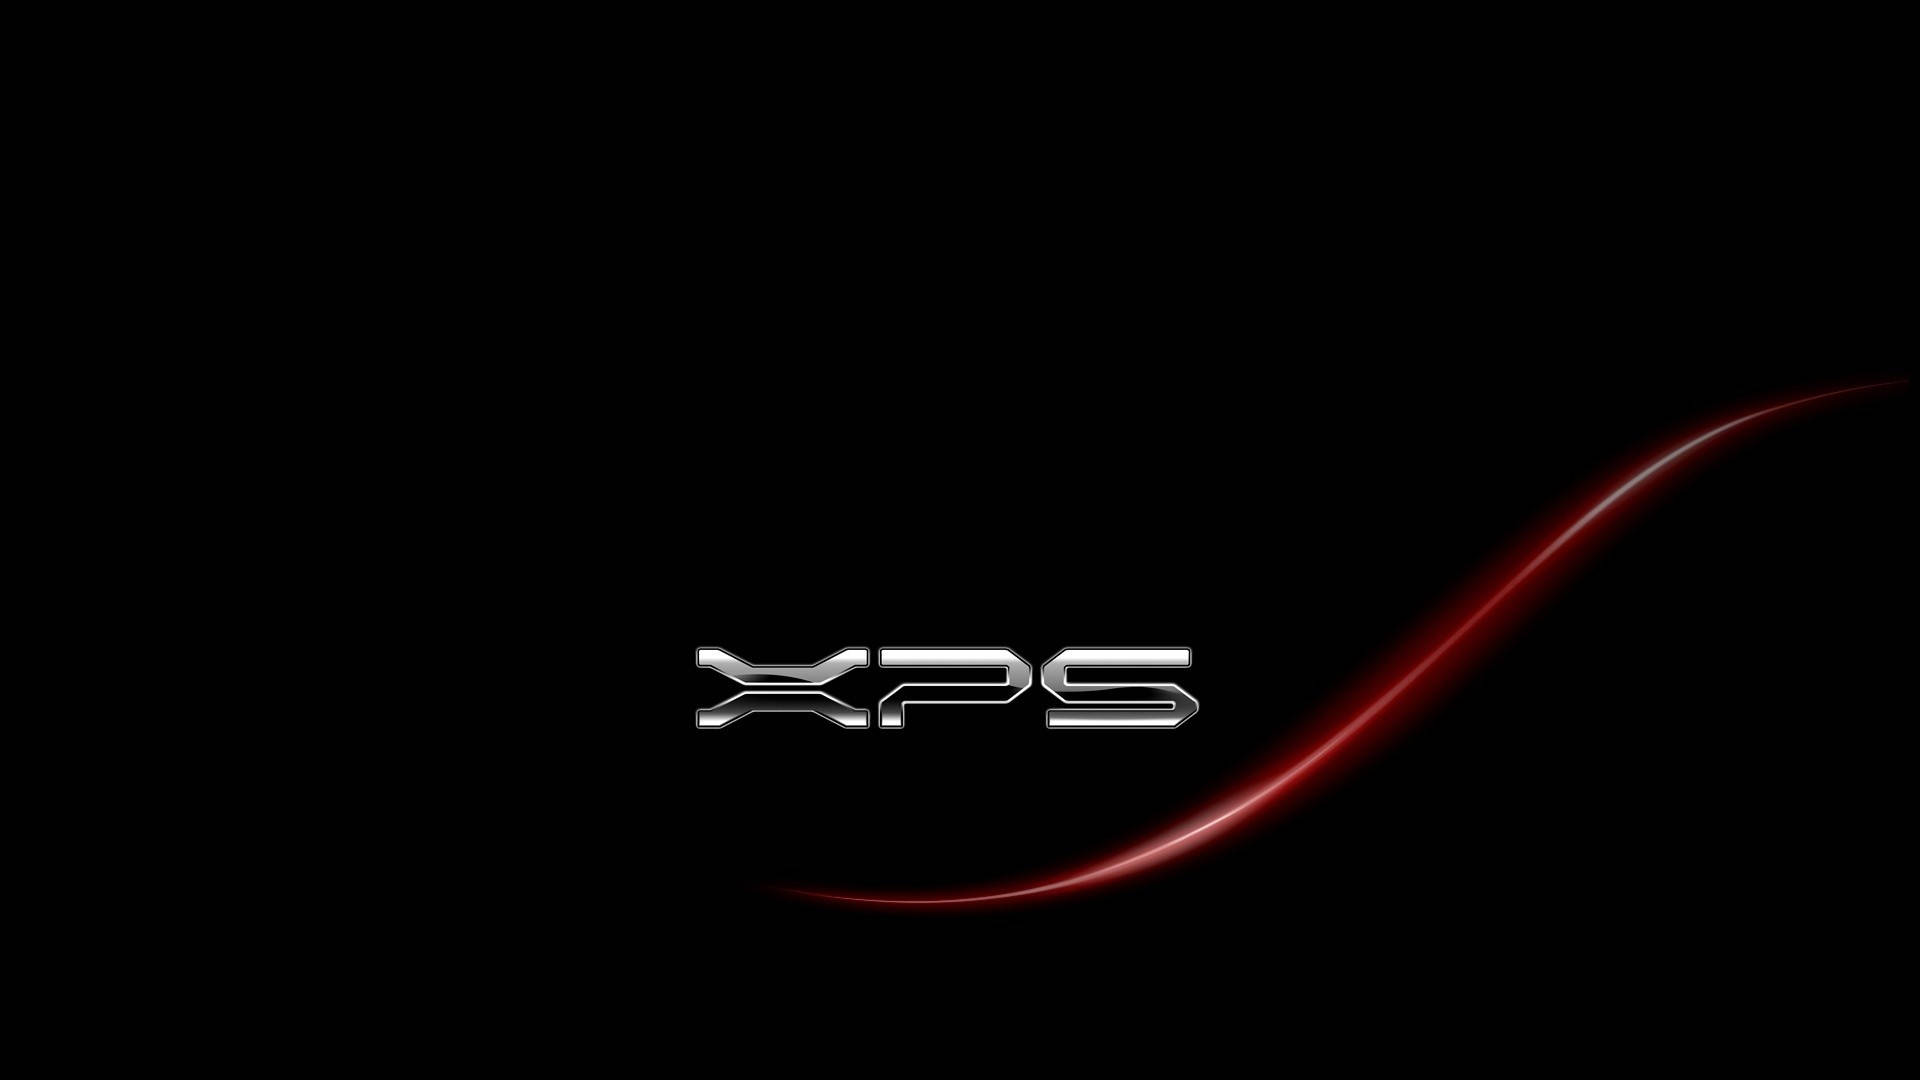 Xps Dell Hd Red Line Background